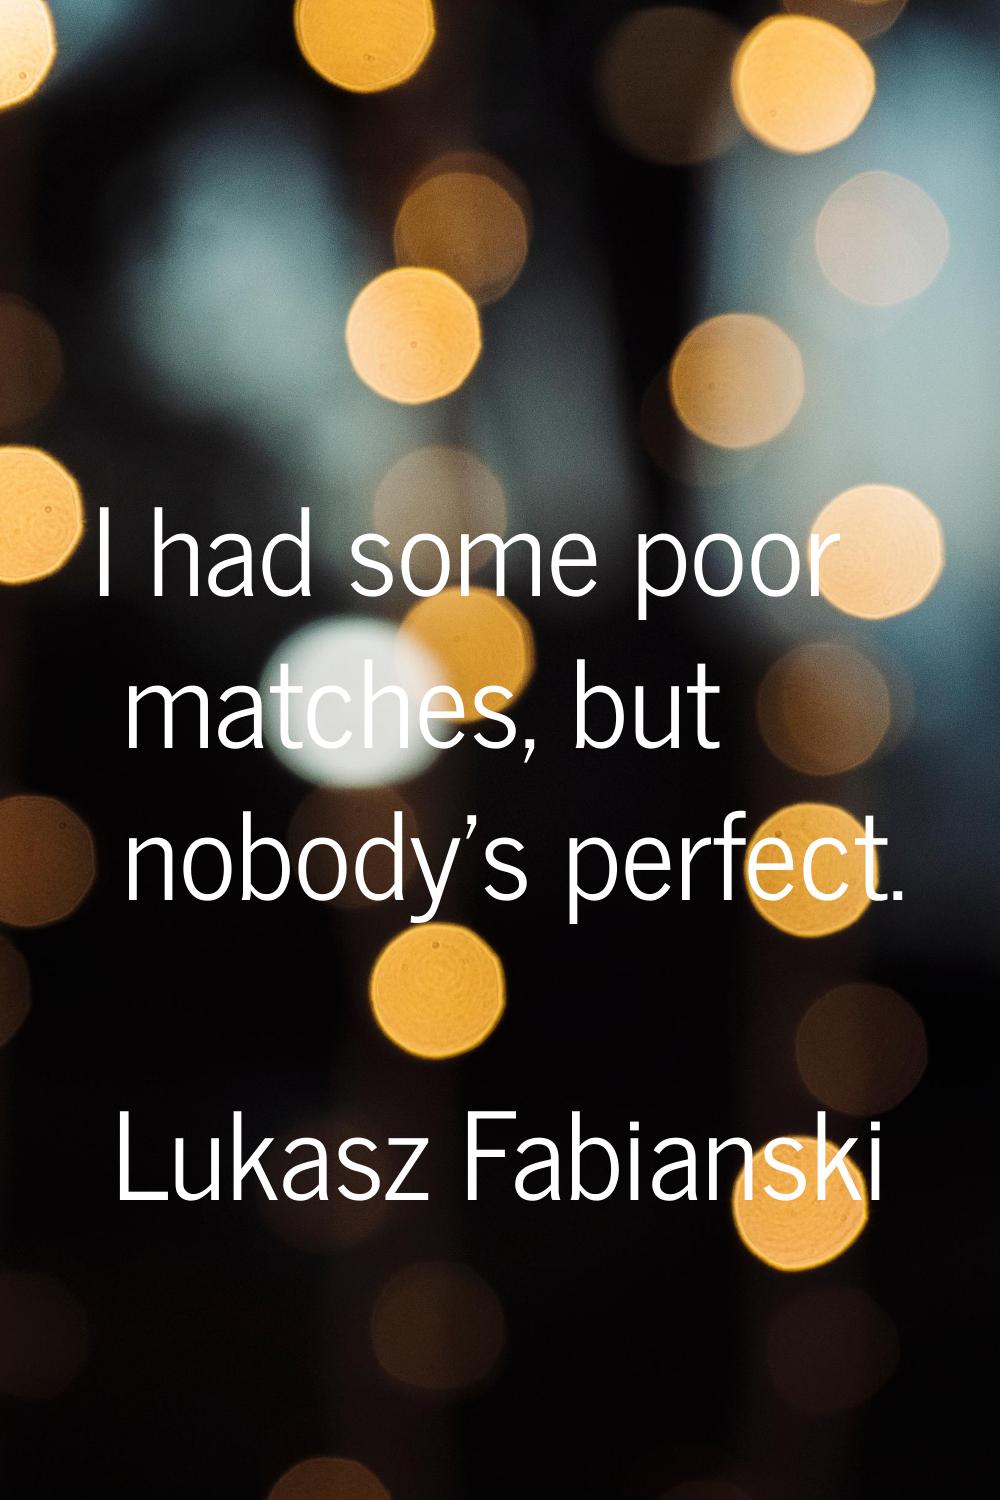 I had some poor matches, but nobody's perfect.